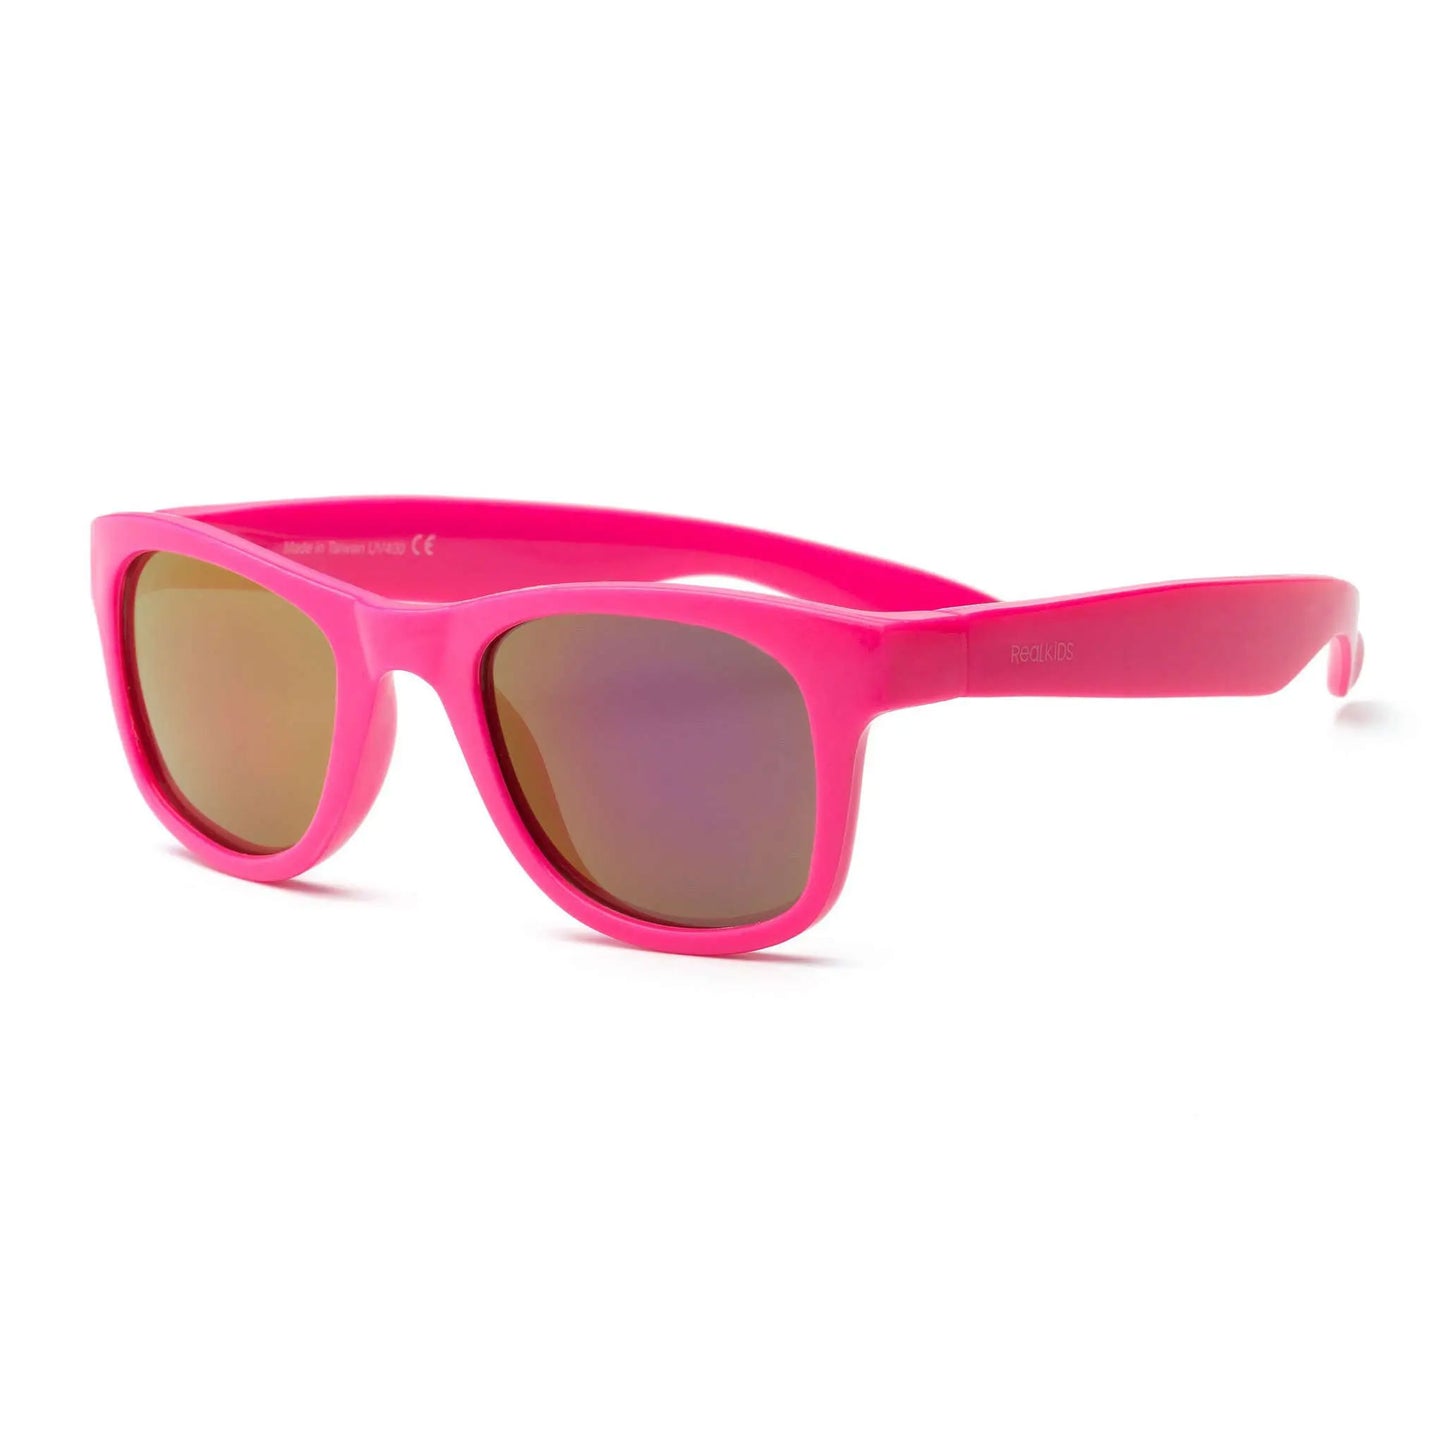 Real Shades Surf Sunglasses provide your child with 100% UVA/UVB protection at all times, and look stylish while they’re at it.